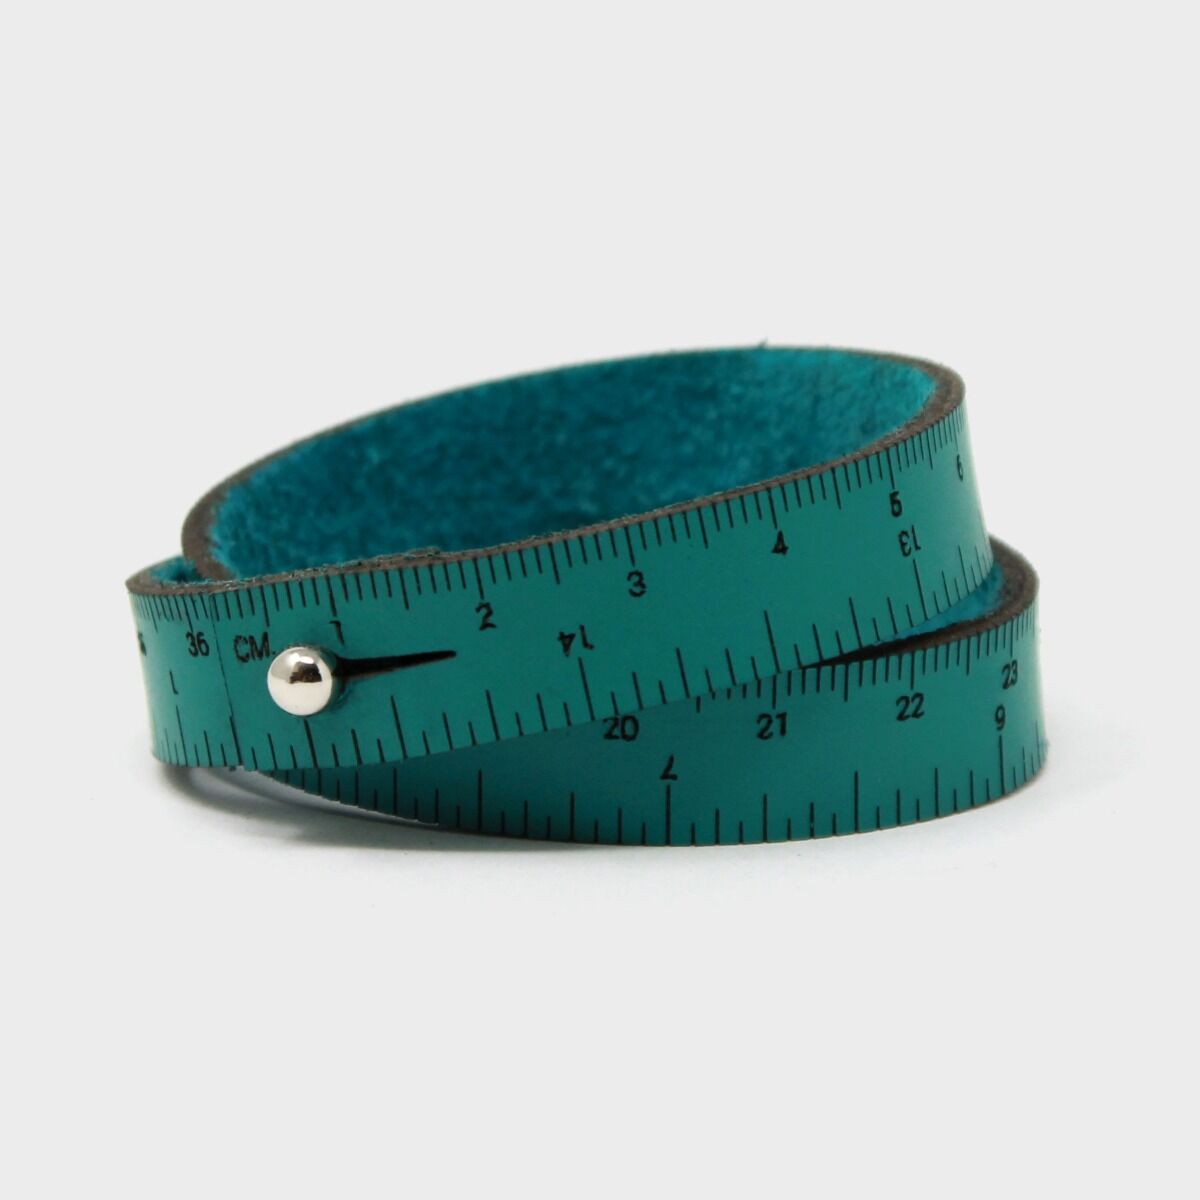 Wrist Rulers by Crossover Industries